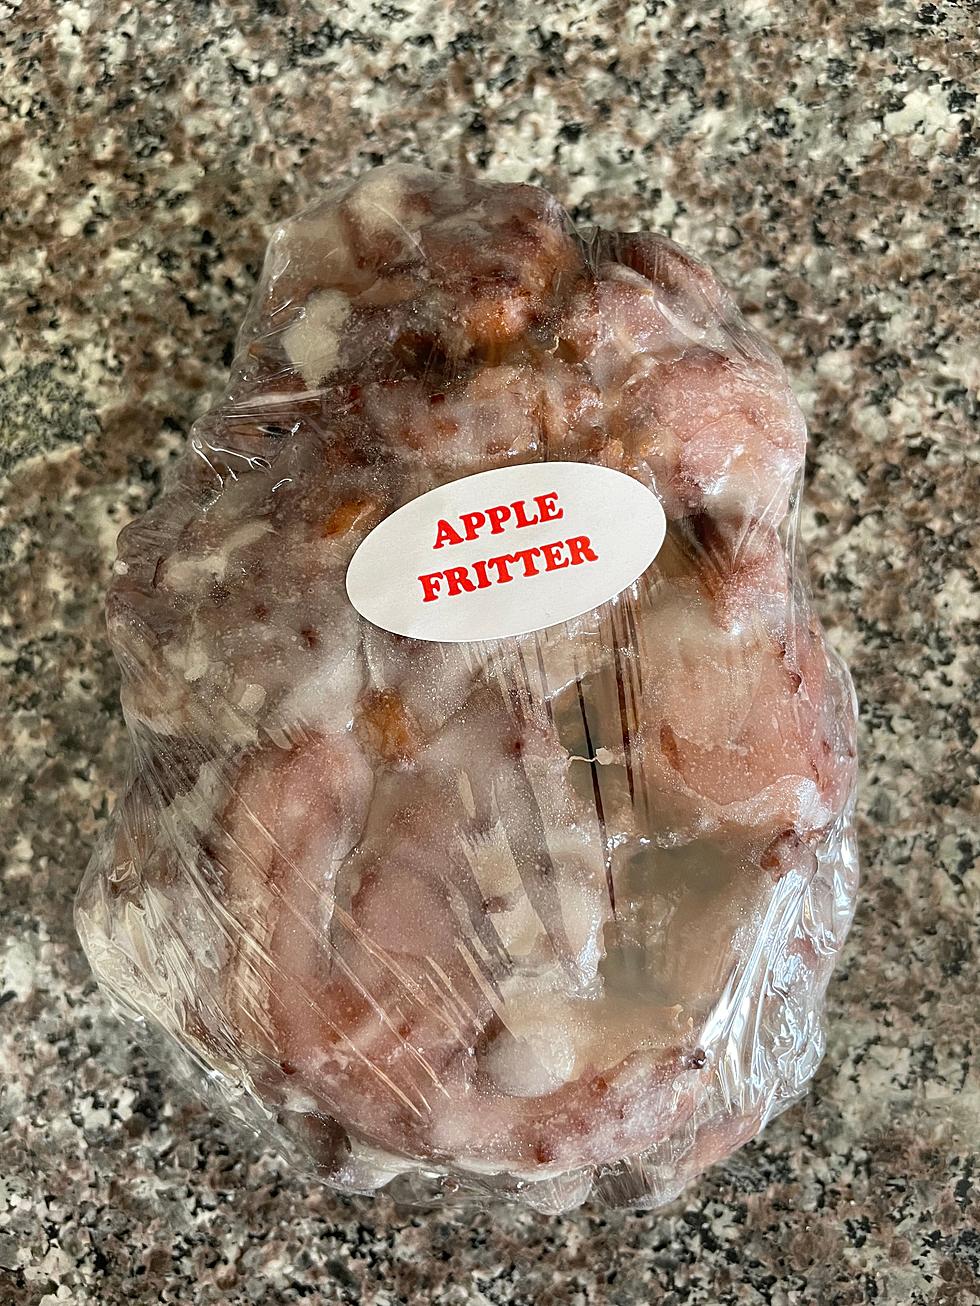 &#8216;Poem&#8217; Professes My Love for Apple Fritters Found at Hudson Valley Stewart&#8217;s Shops